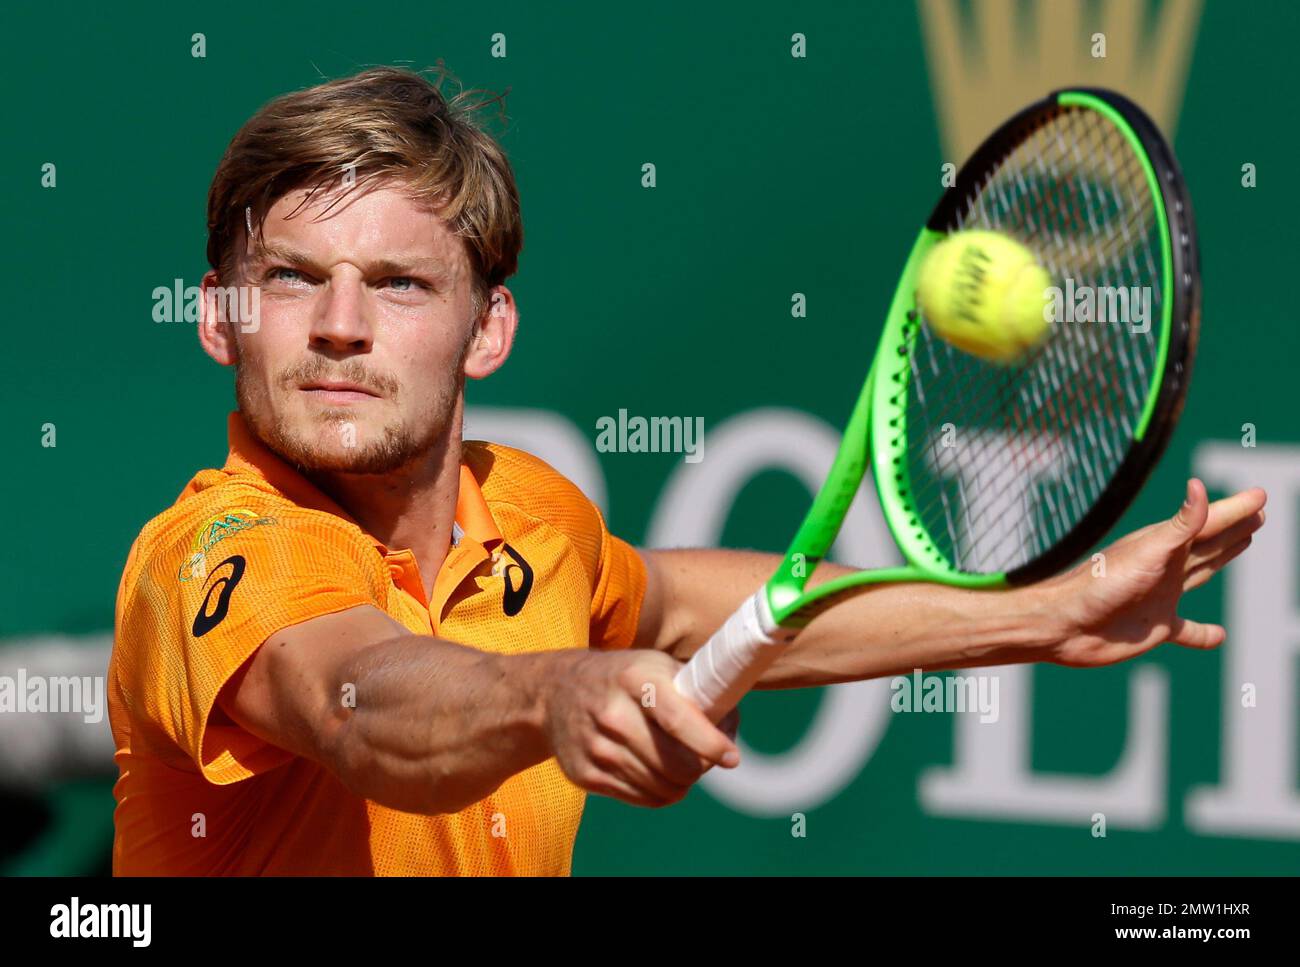 Belgiums David Goffin returns the ball to Spains Rafael Nadal during their semifinal match of the Monte Carlo Tennis Masters tournament in Monaco, Saturday, April, 22, 2017